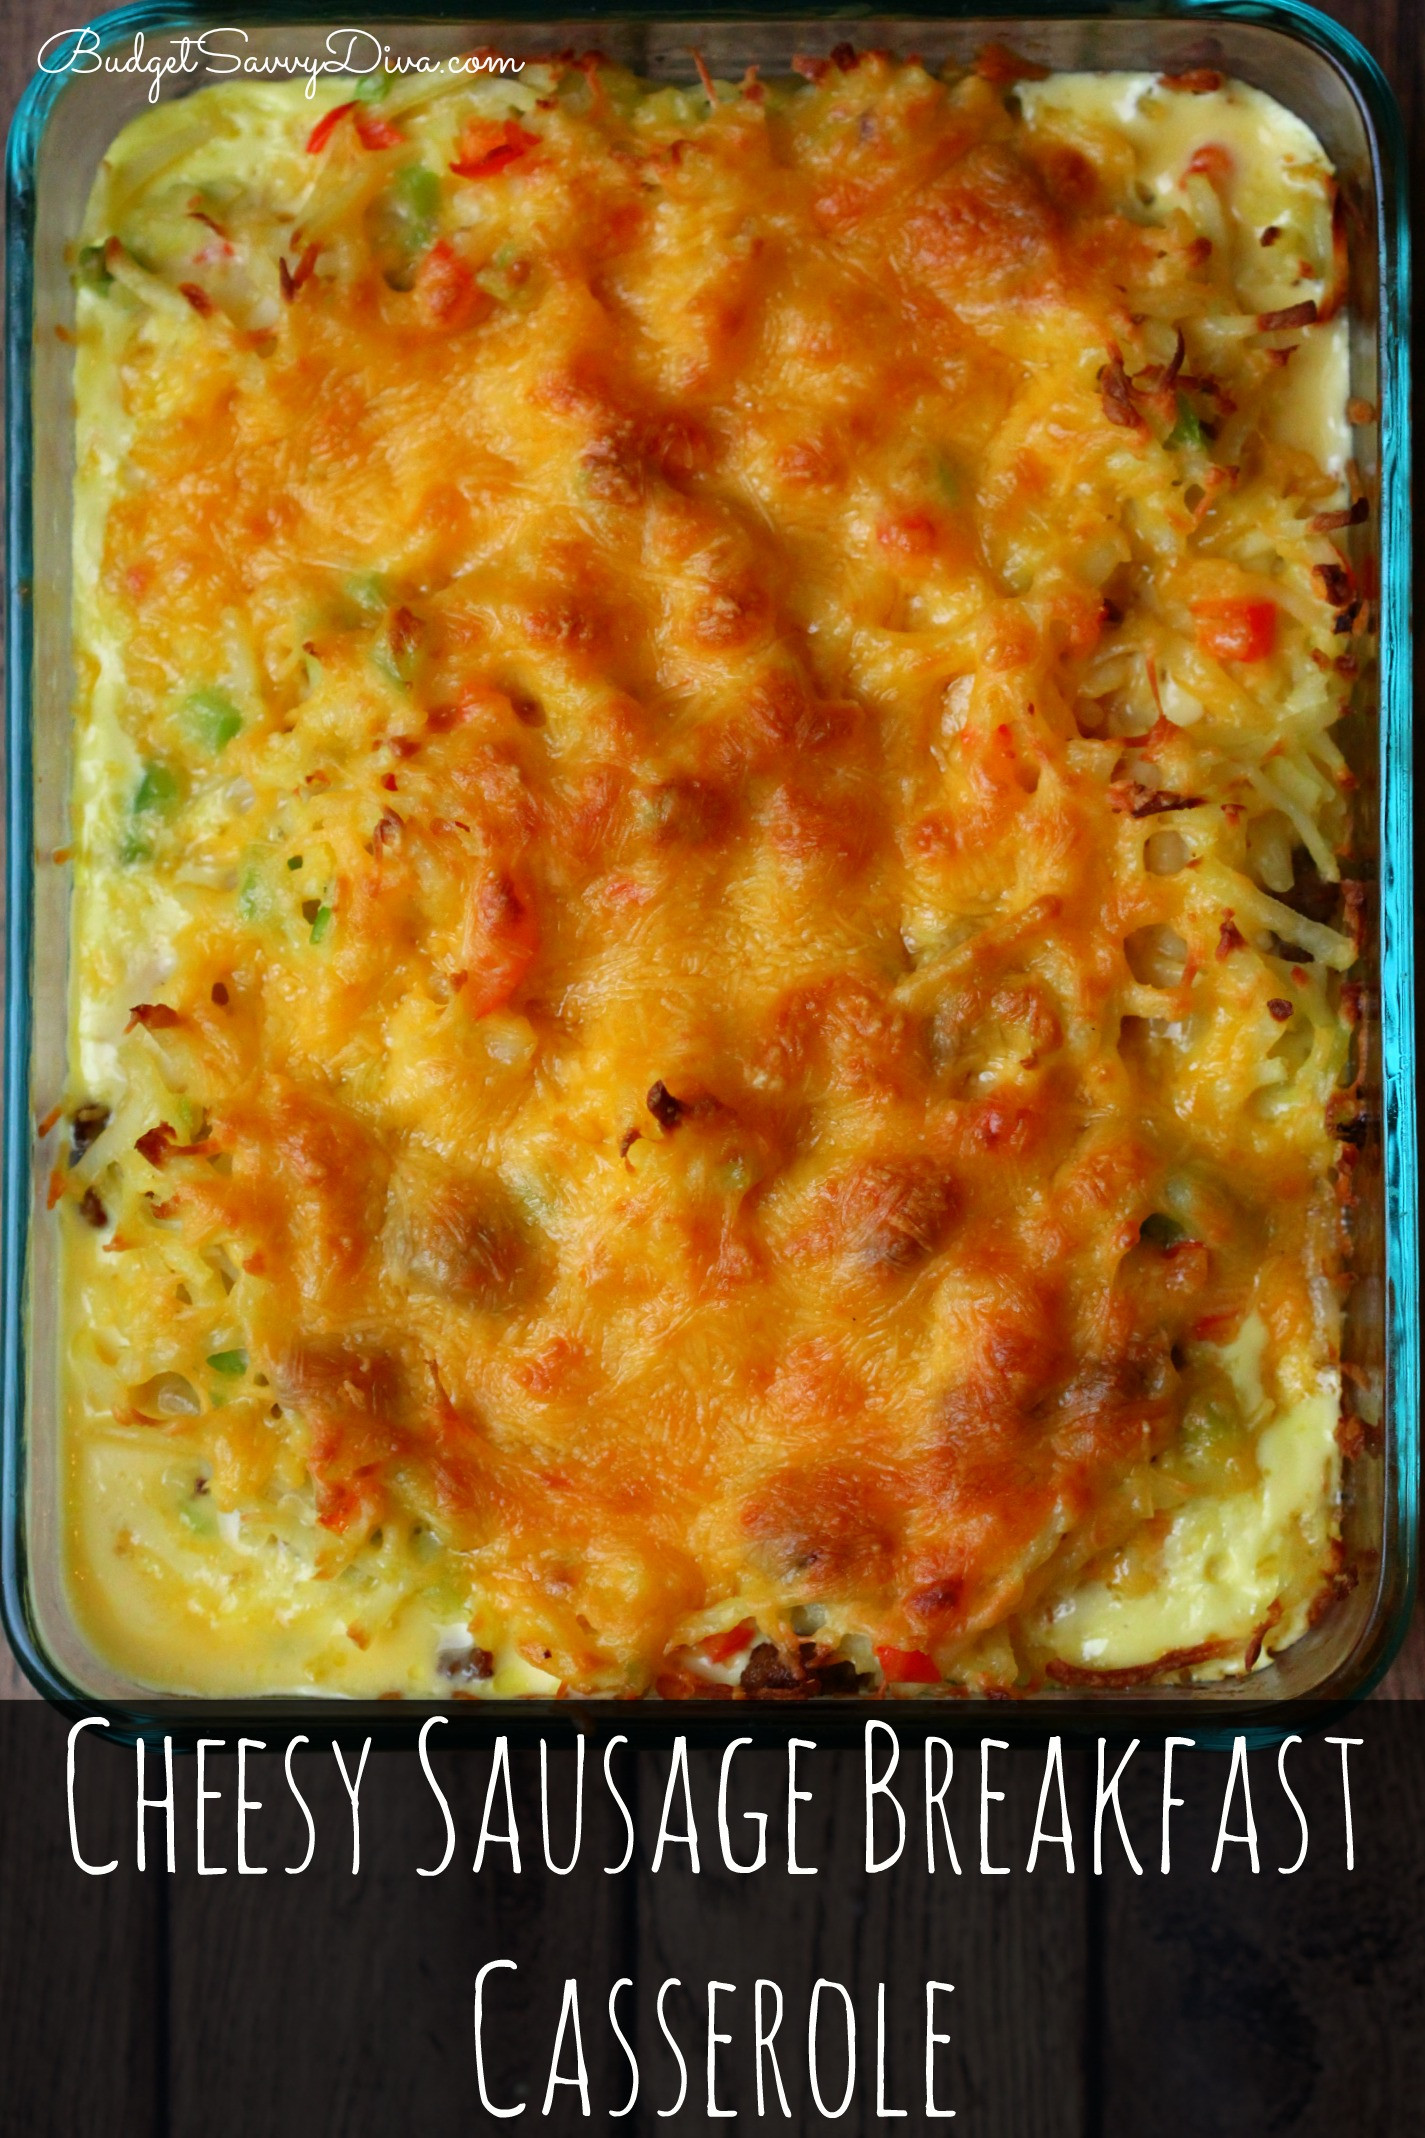 Recipe For Breakfast Casserole With Sausage
 Cheesy Sausage Breakfast Casserole Recipe